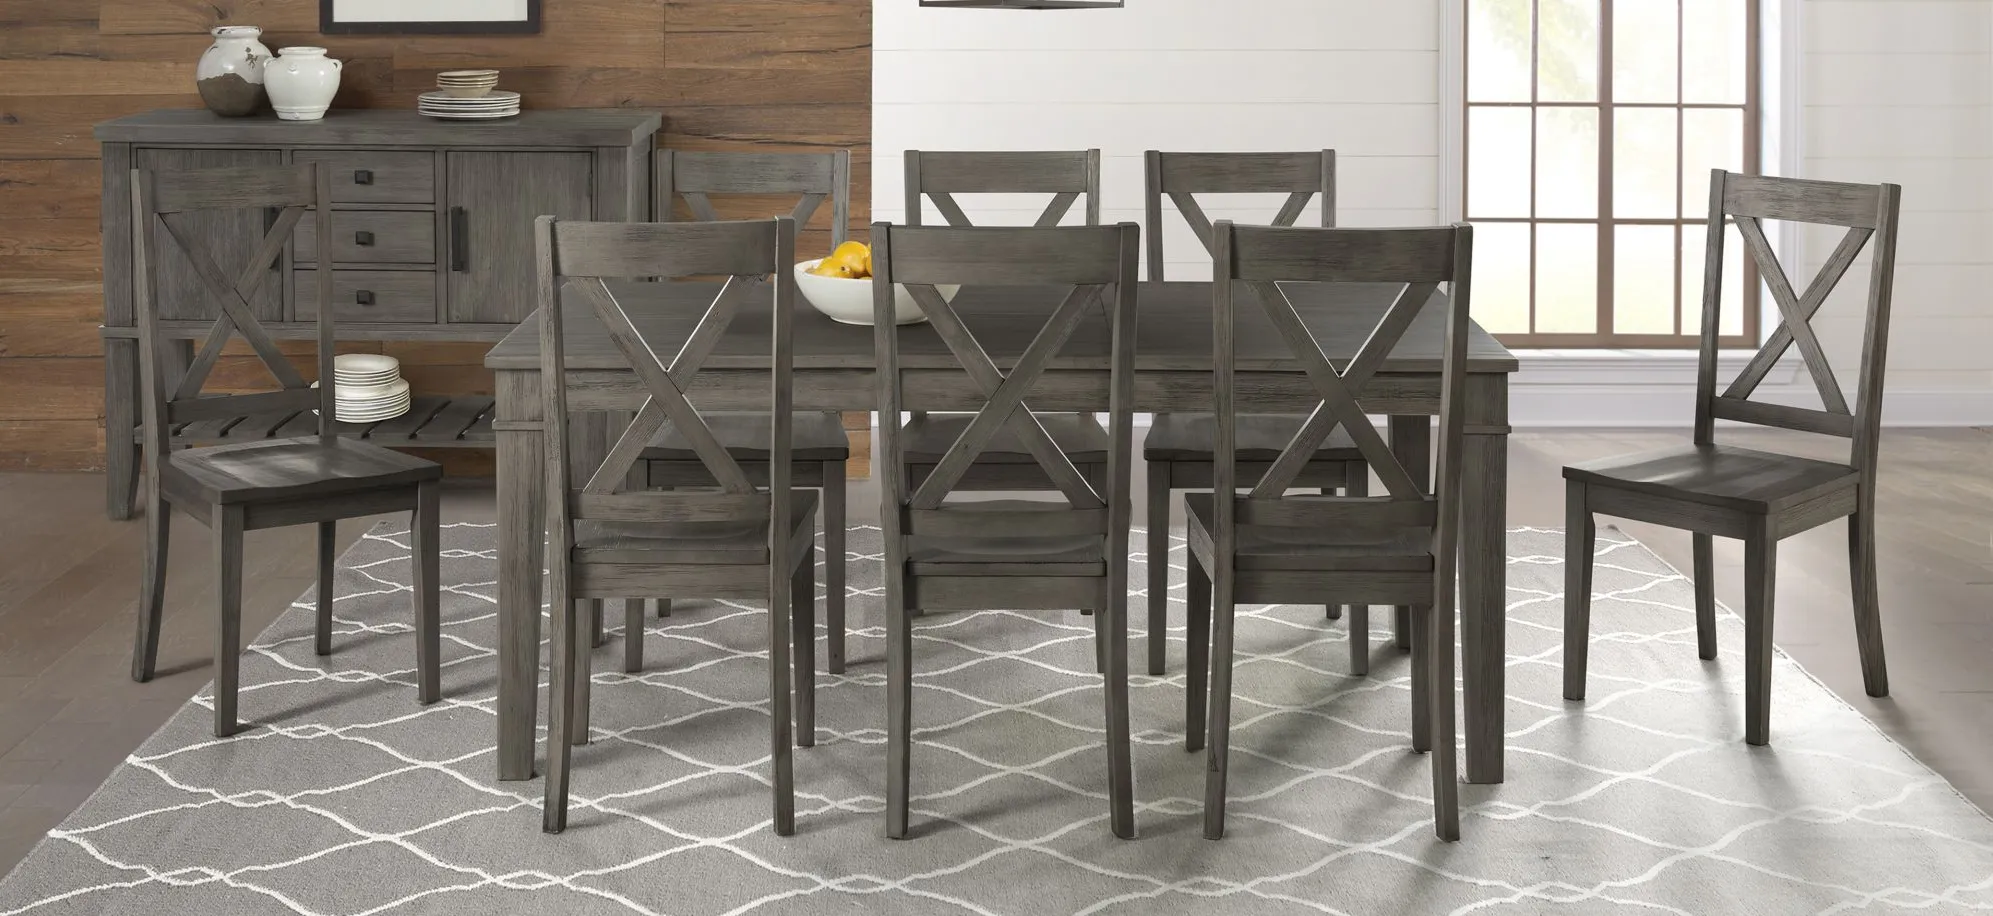 Huron 9-pc. Rectangular X-Back Dining Set in Distressed Gray by A-America